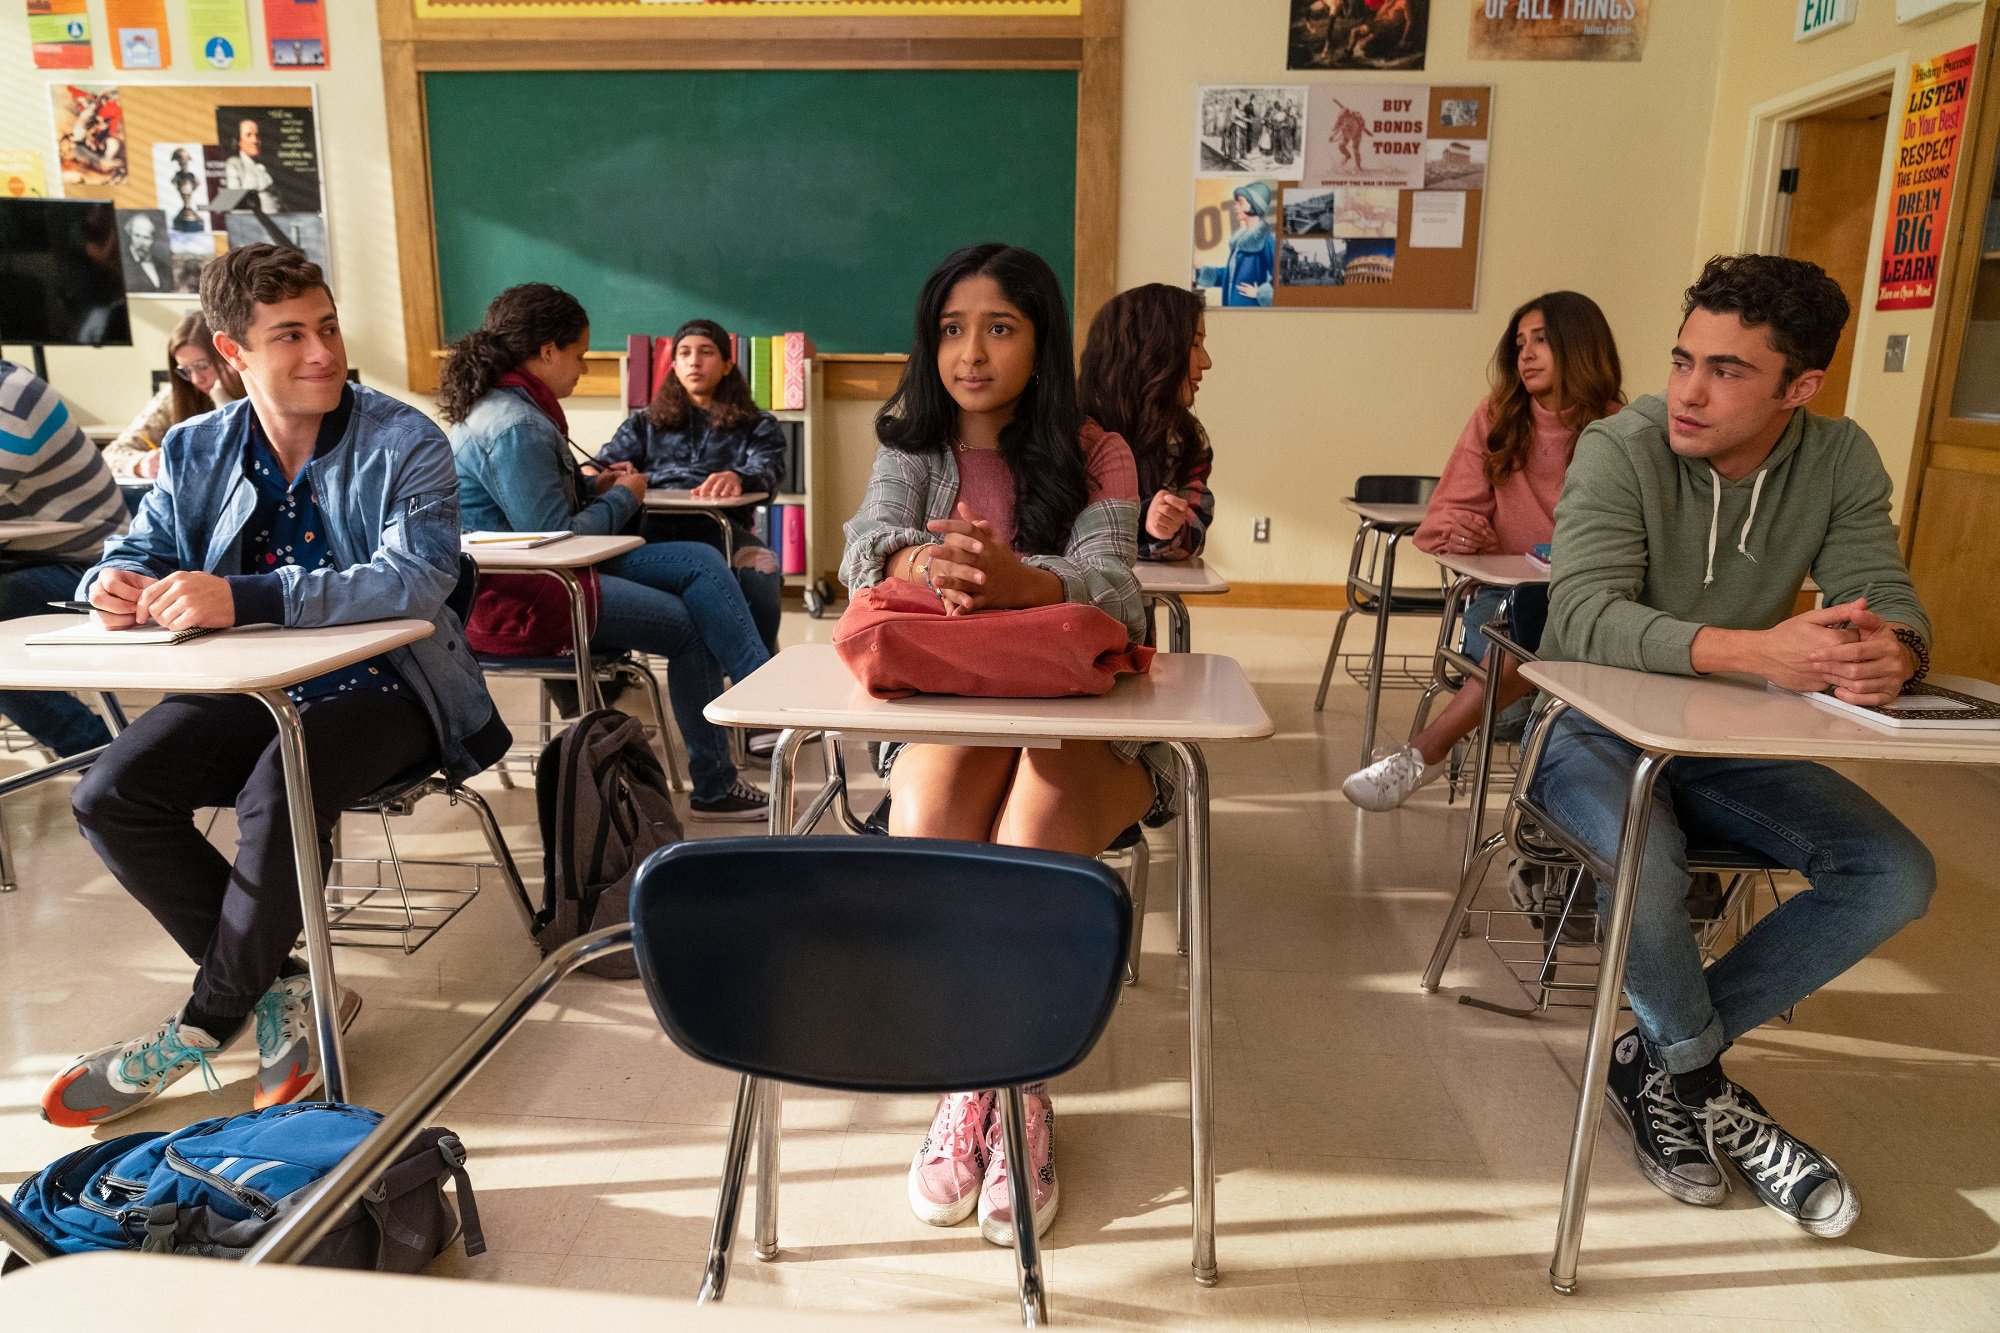 Ben Gross, Devi Vishwakumar, and Paxton Hall-Yoshida sit in a classroom in 'Never Have I Ever'